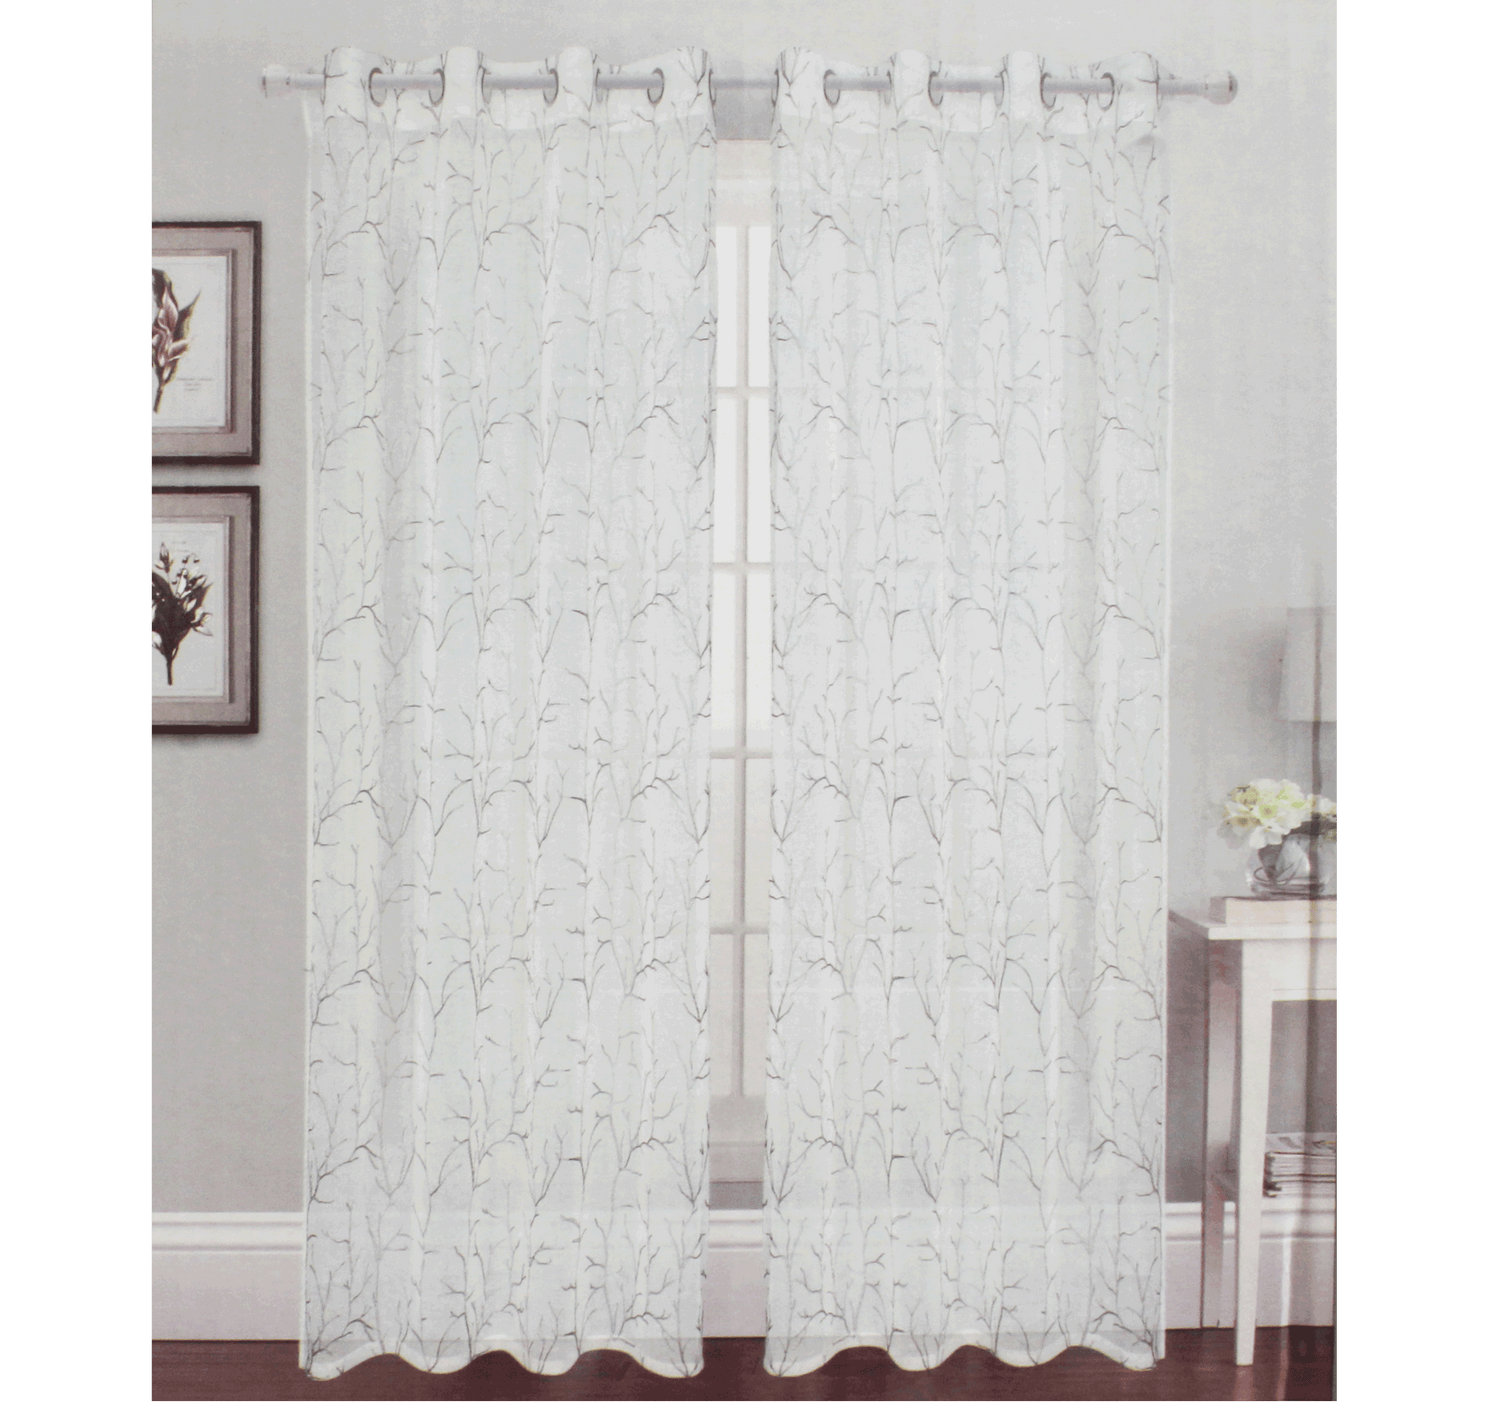 Angel Sheer Embroidery Curtain Sizes: 54" x 84", 54" x 96"